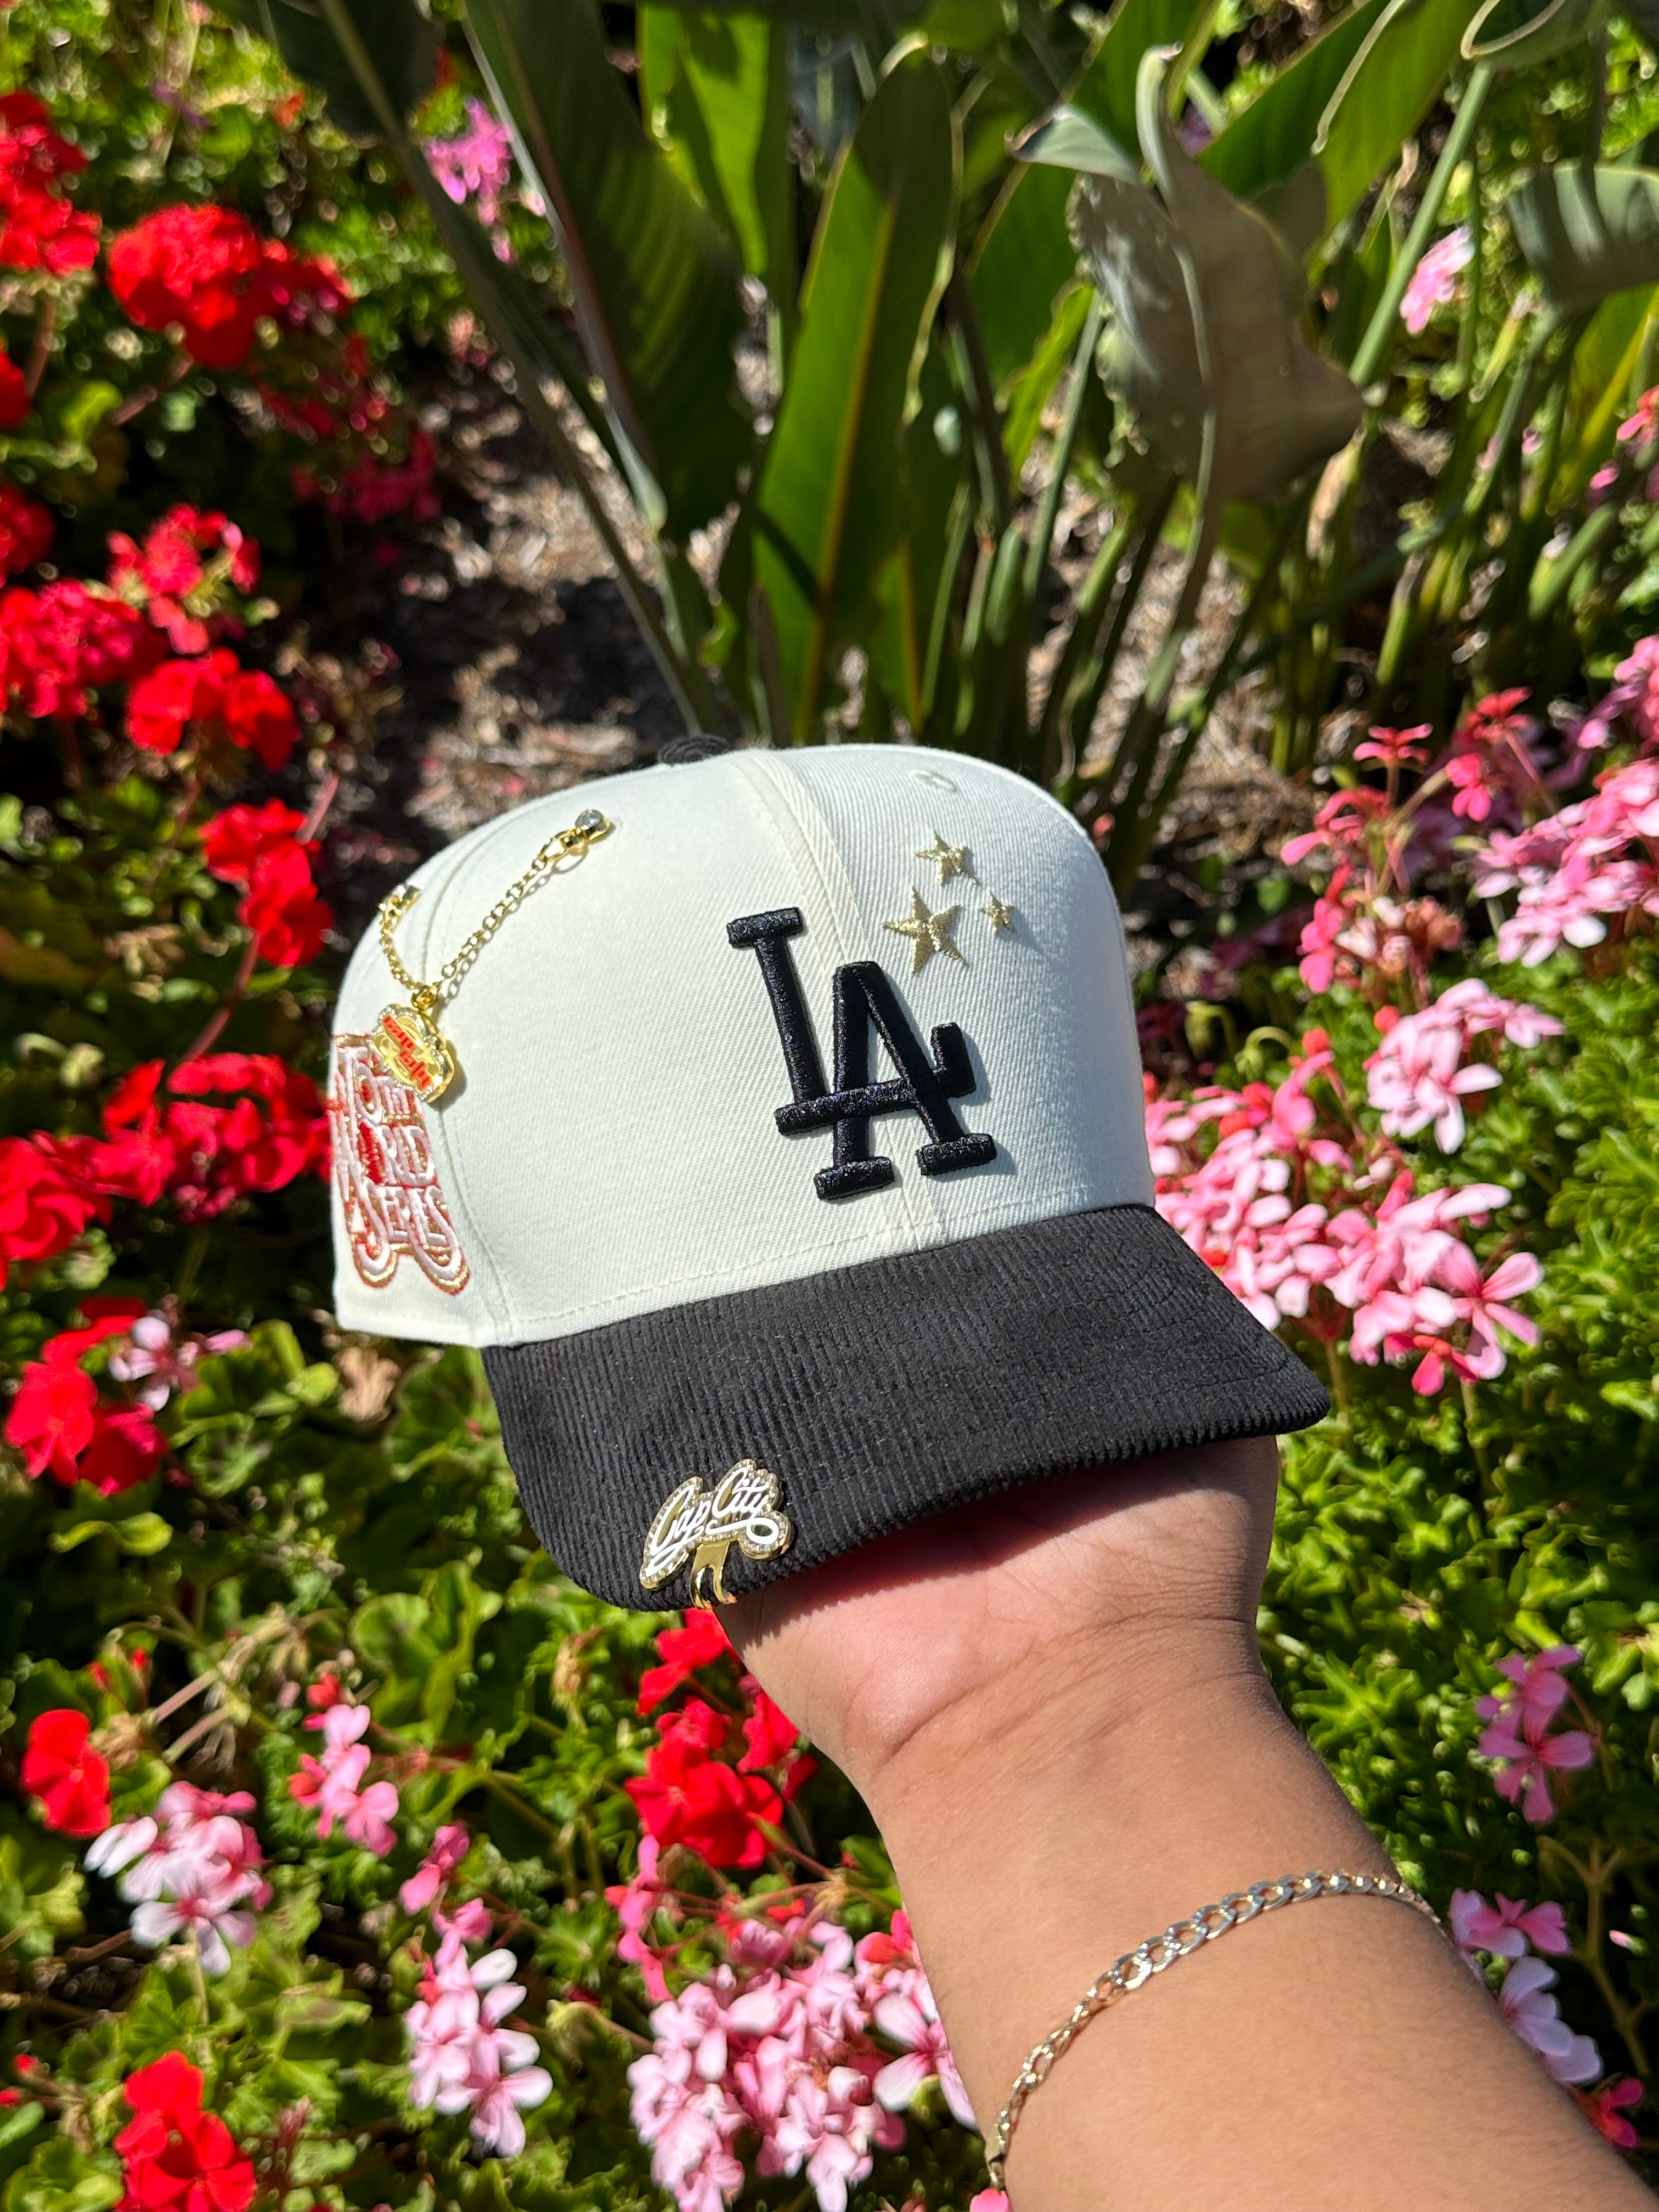 NEW ERA EXCLUSIVE 9FIFTY CHROME WHITE/CORDUROY LOS ANGELES DODGERS SNAPBACK W/ 75TH WORLD SERIES PATCH